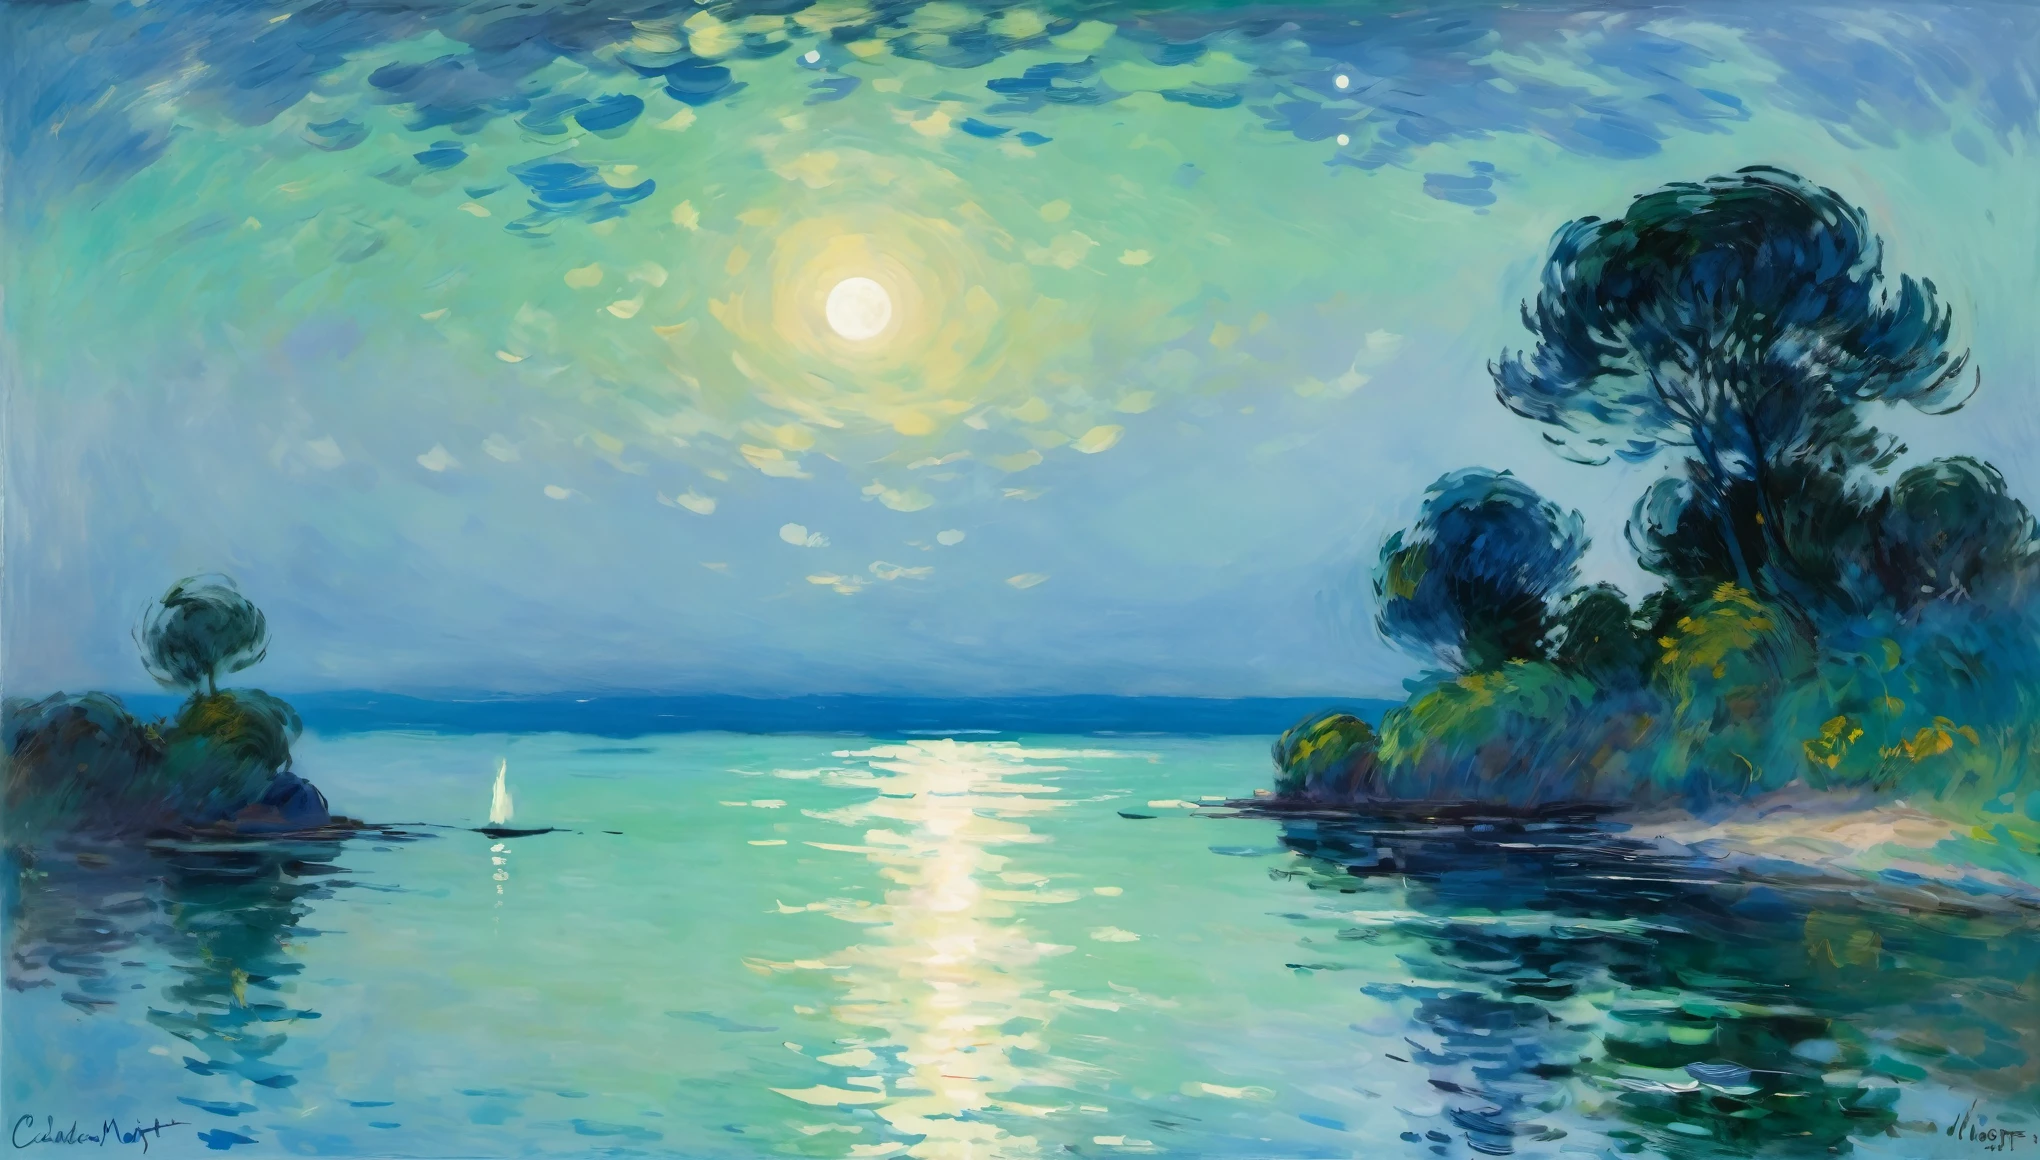 This impressionist painting captures the enchanting beauty of nature, (Blue Coast), The sky fades from green to blue, while the water reflects the moon's glow, drawing the eye to the distance. Signed by Claude Monet, it showcases his unique style and masterful technique, a treasure worth admiring.